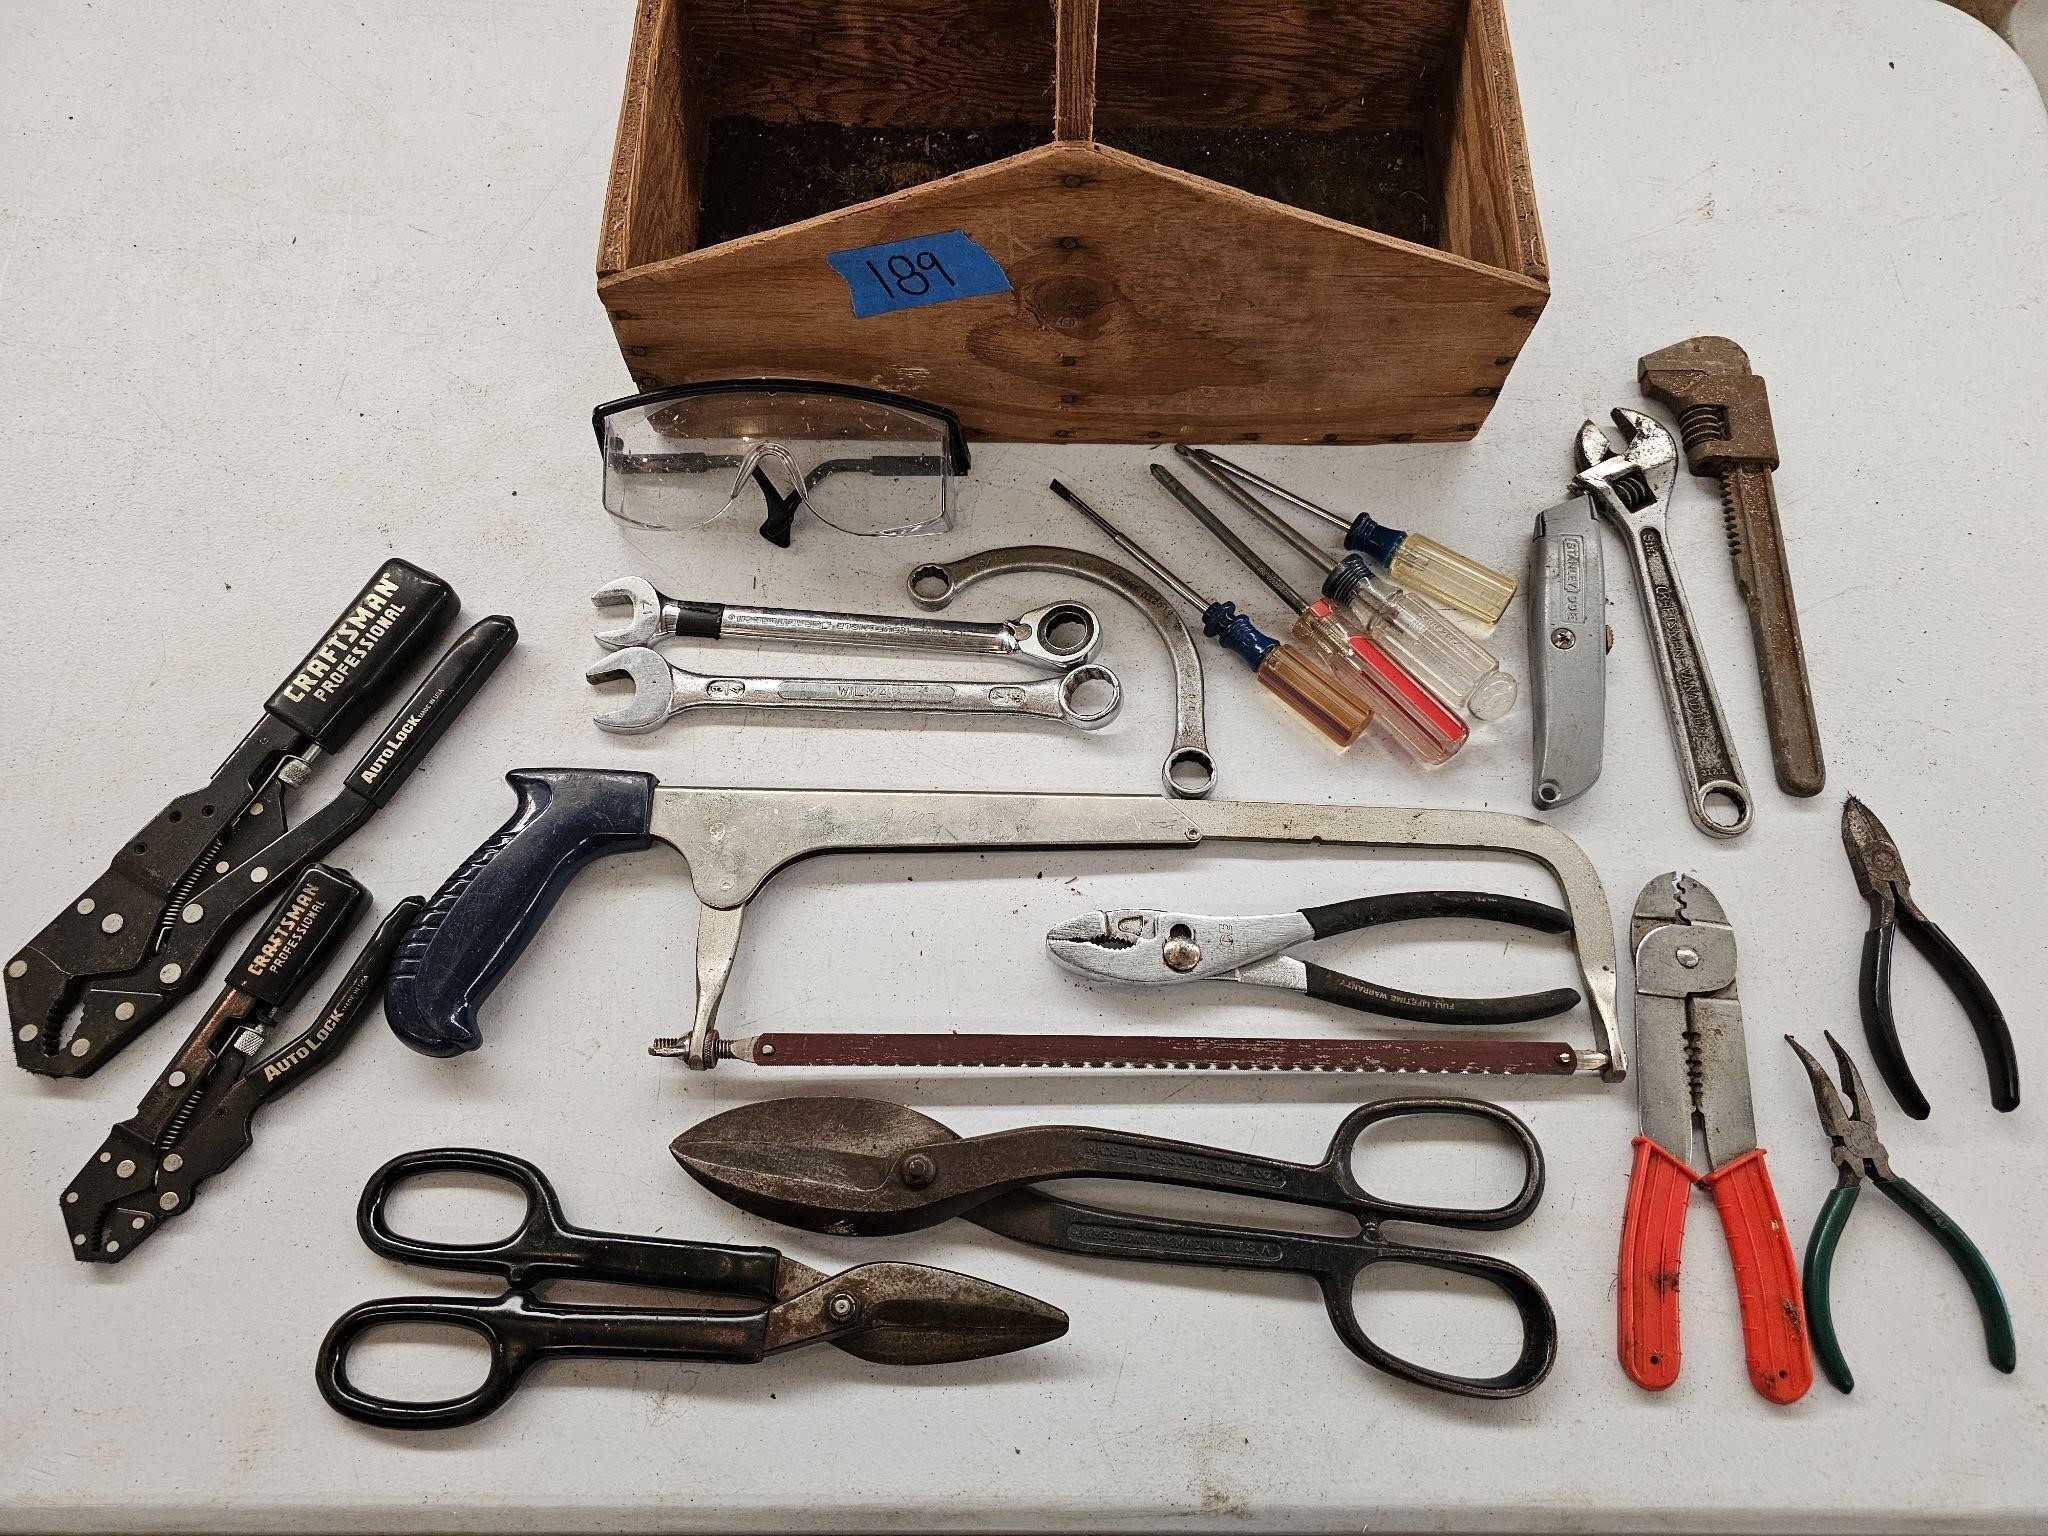 Crate of Misc. Tools